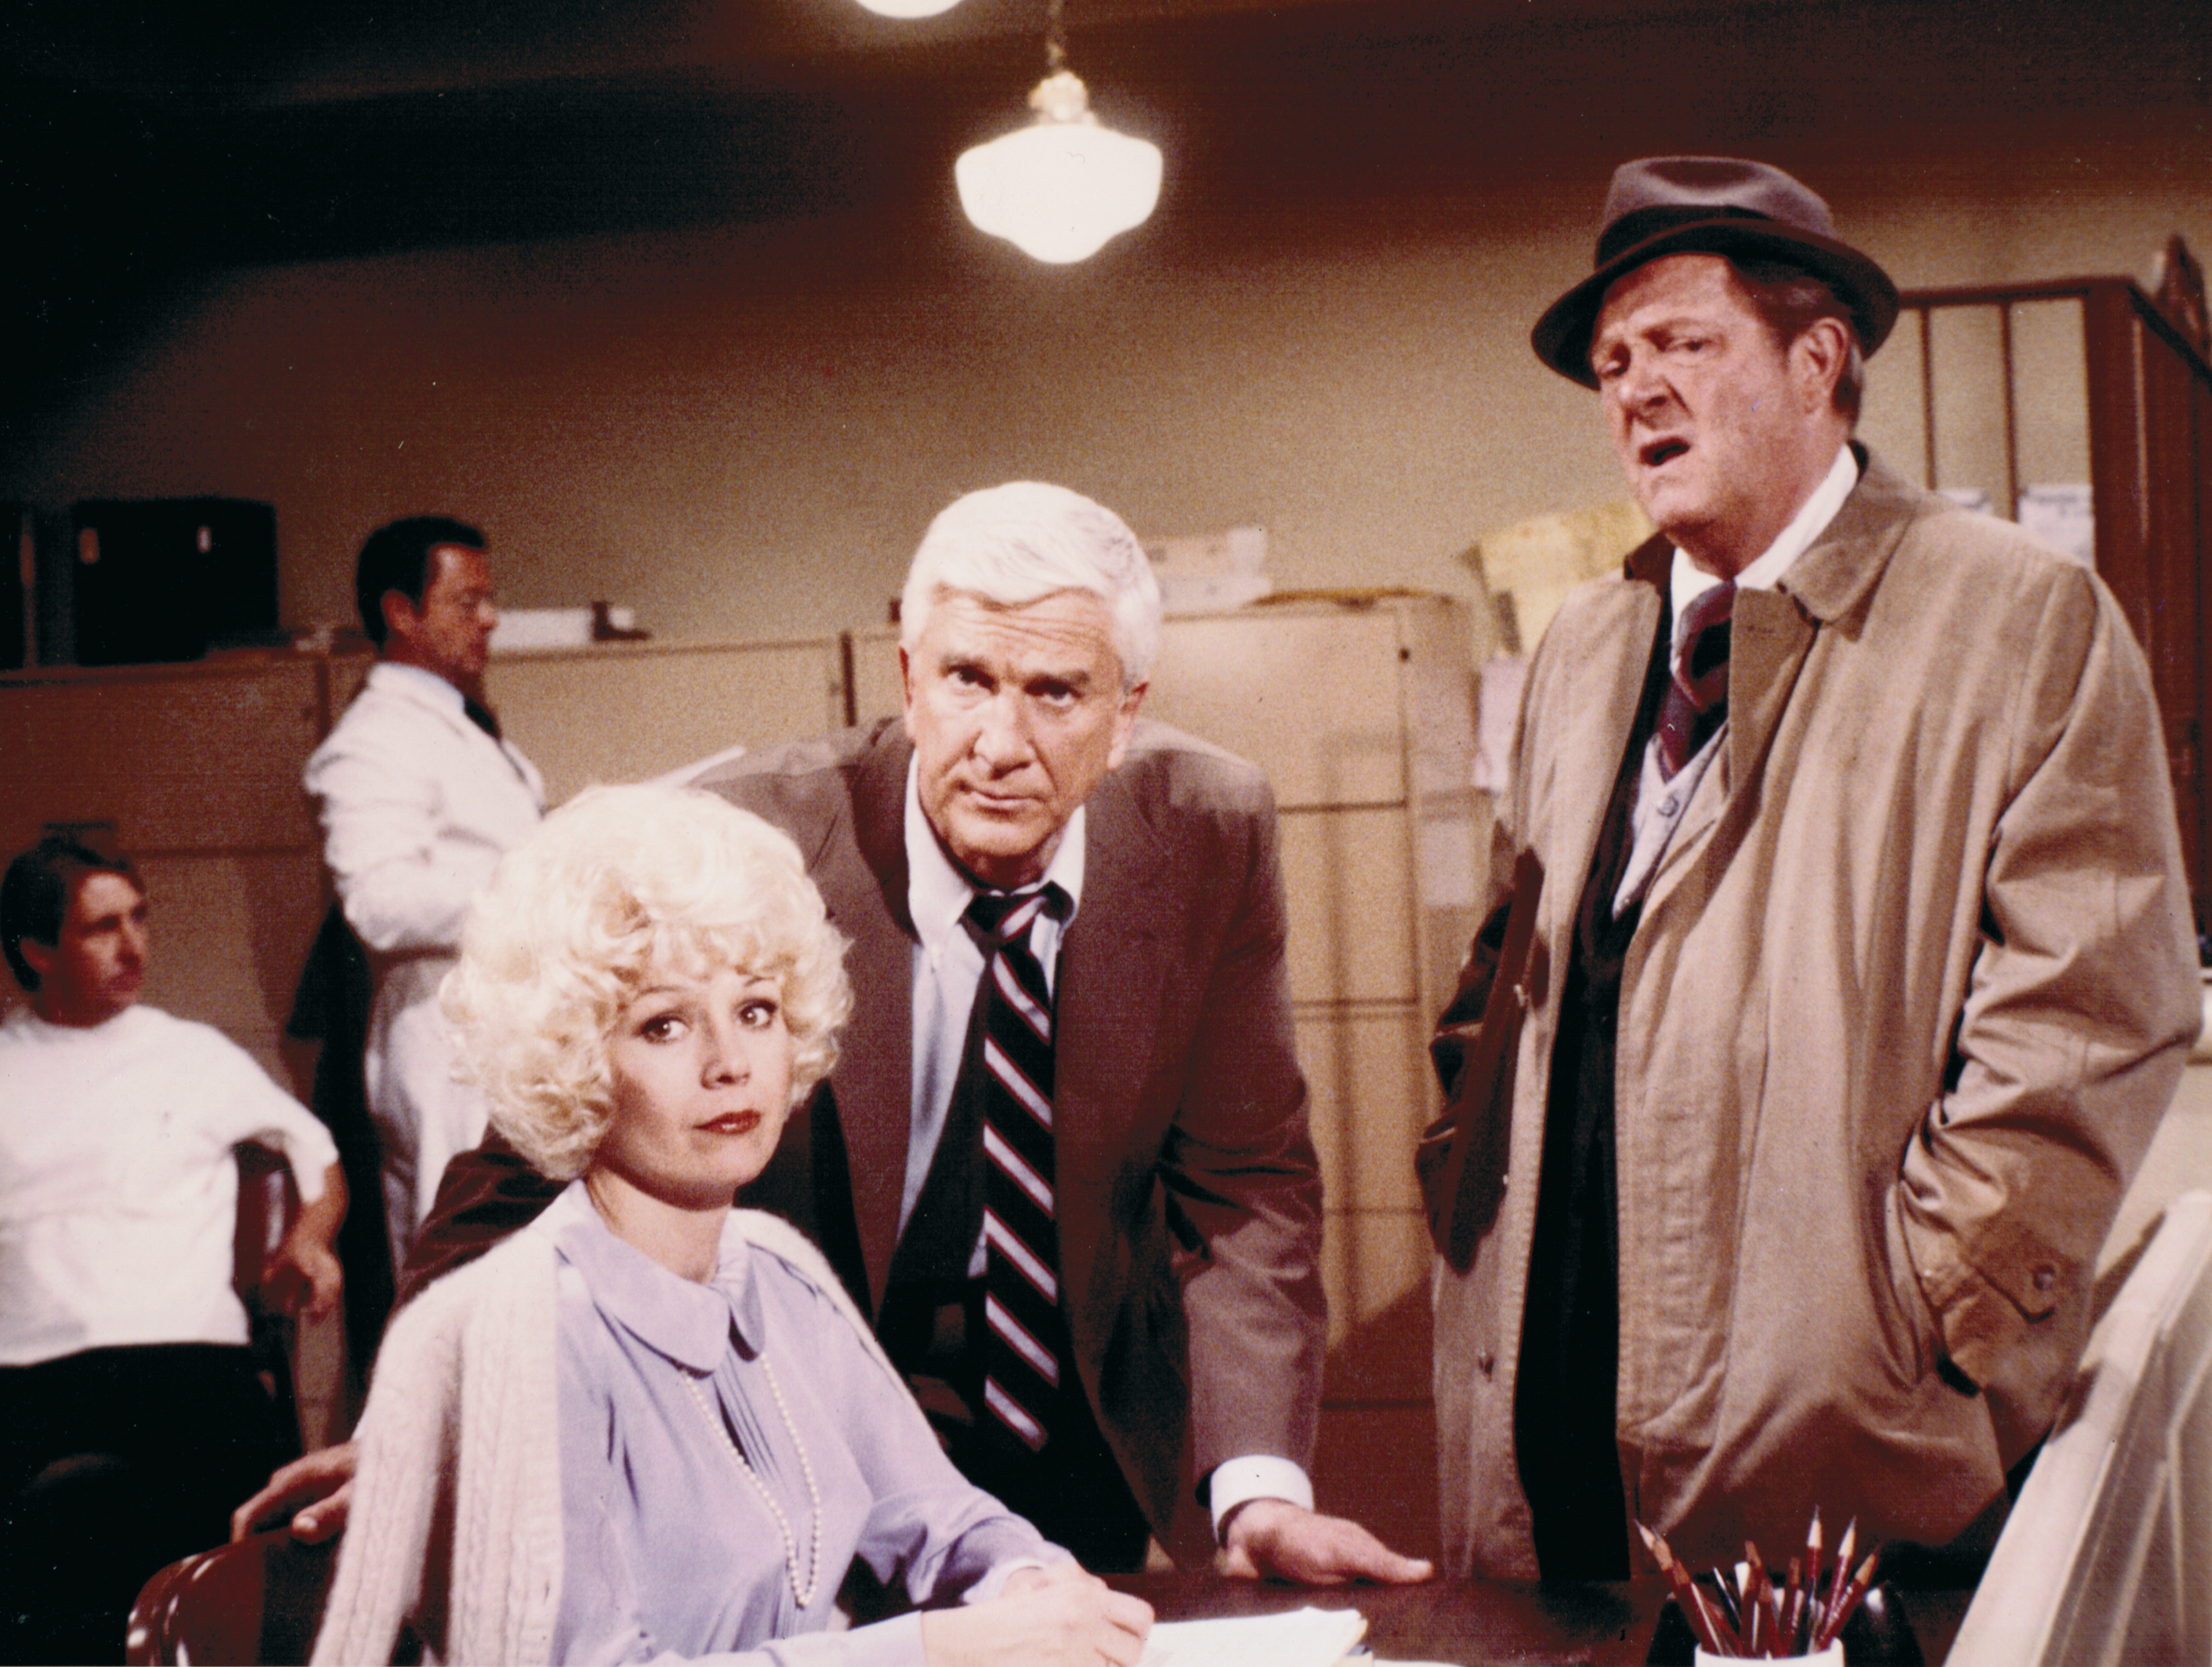 Police Squad: Kathryn Leigh Scott as Sally Decker with Leslie Nielsen and Alan North